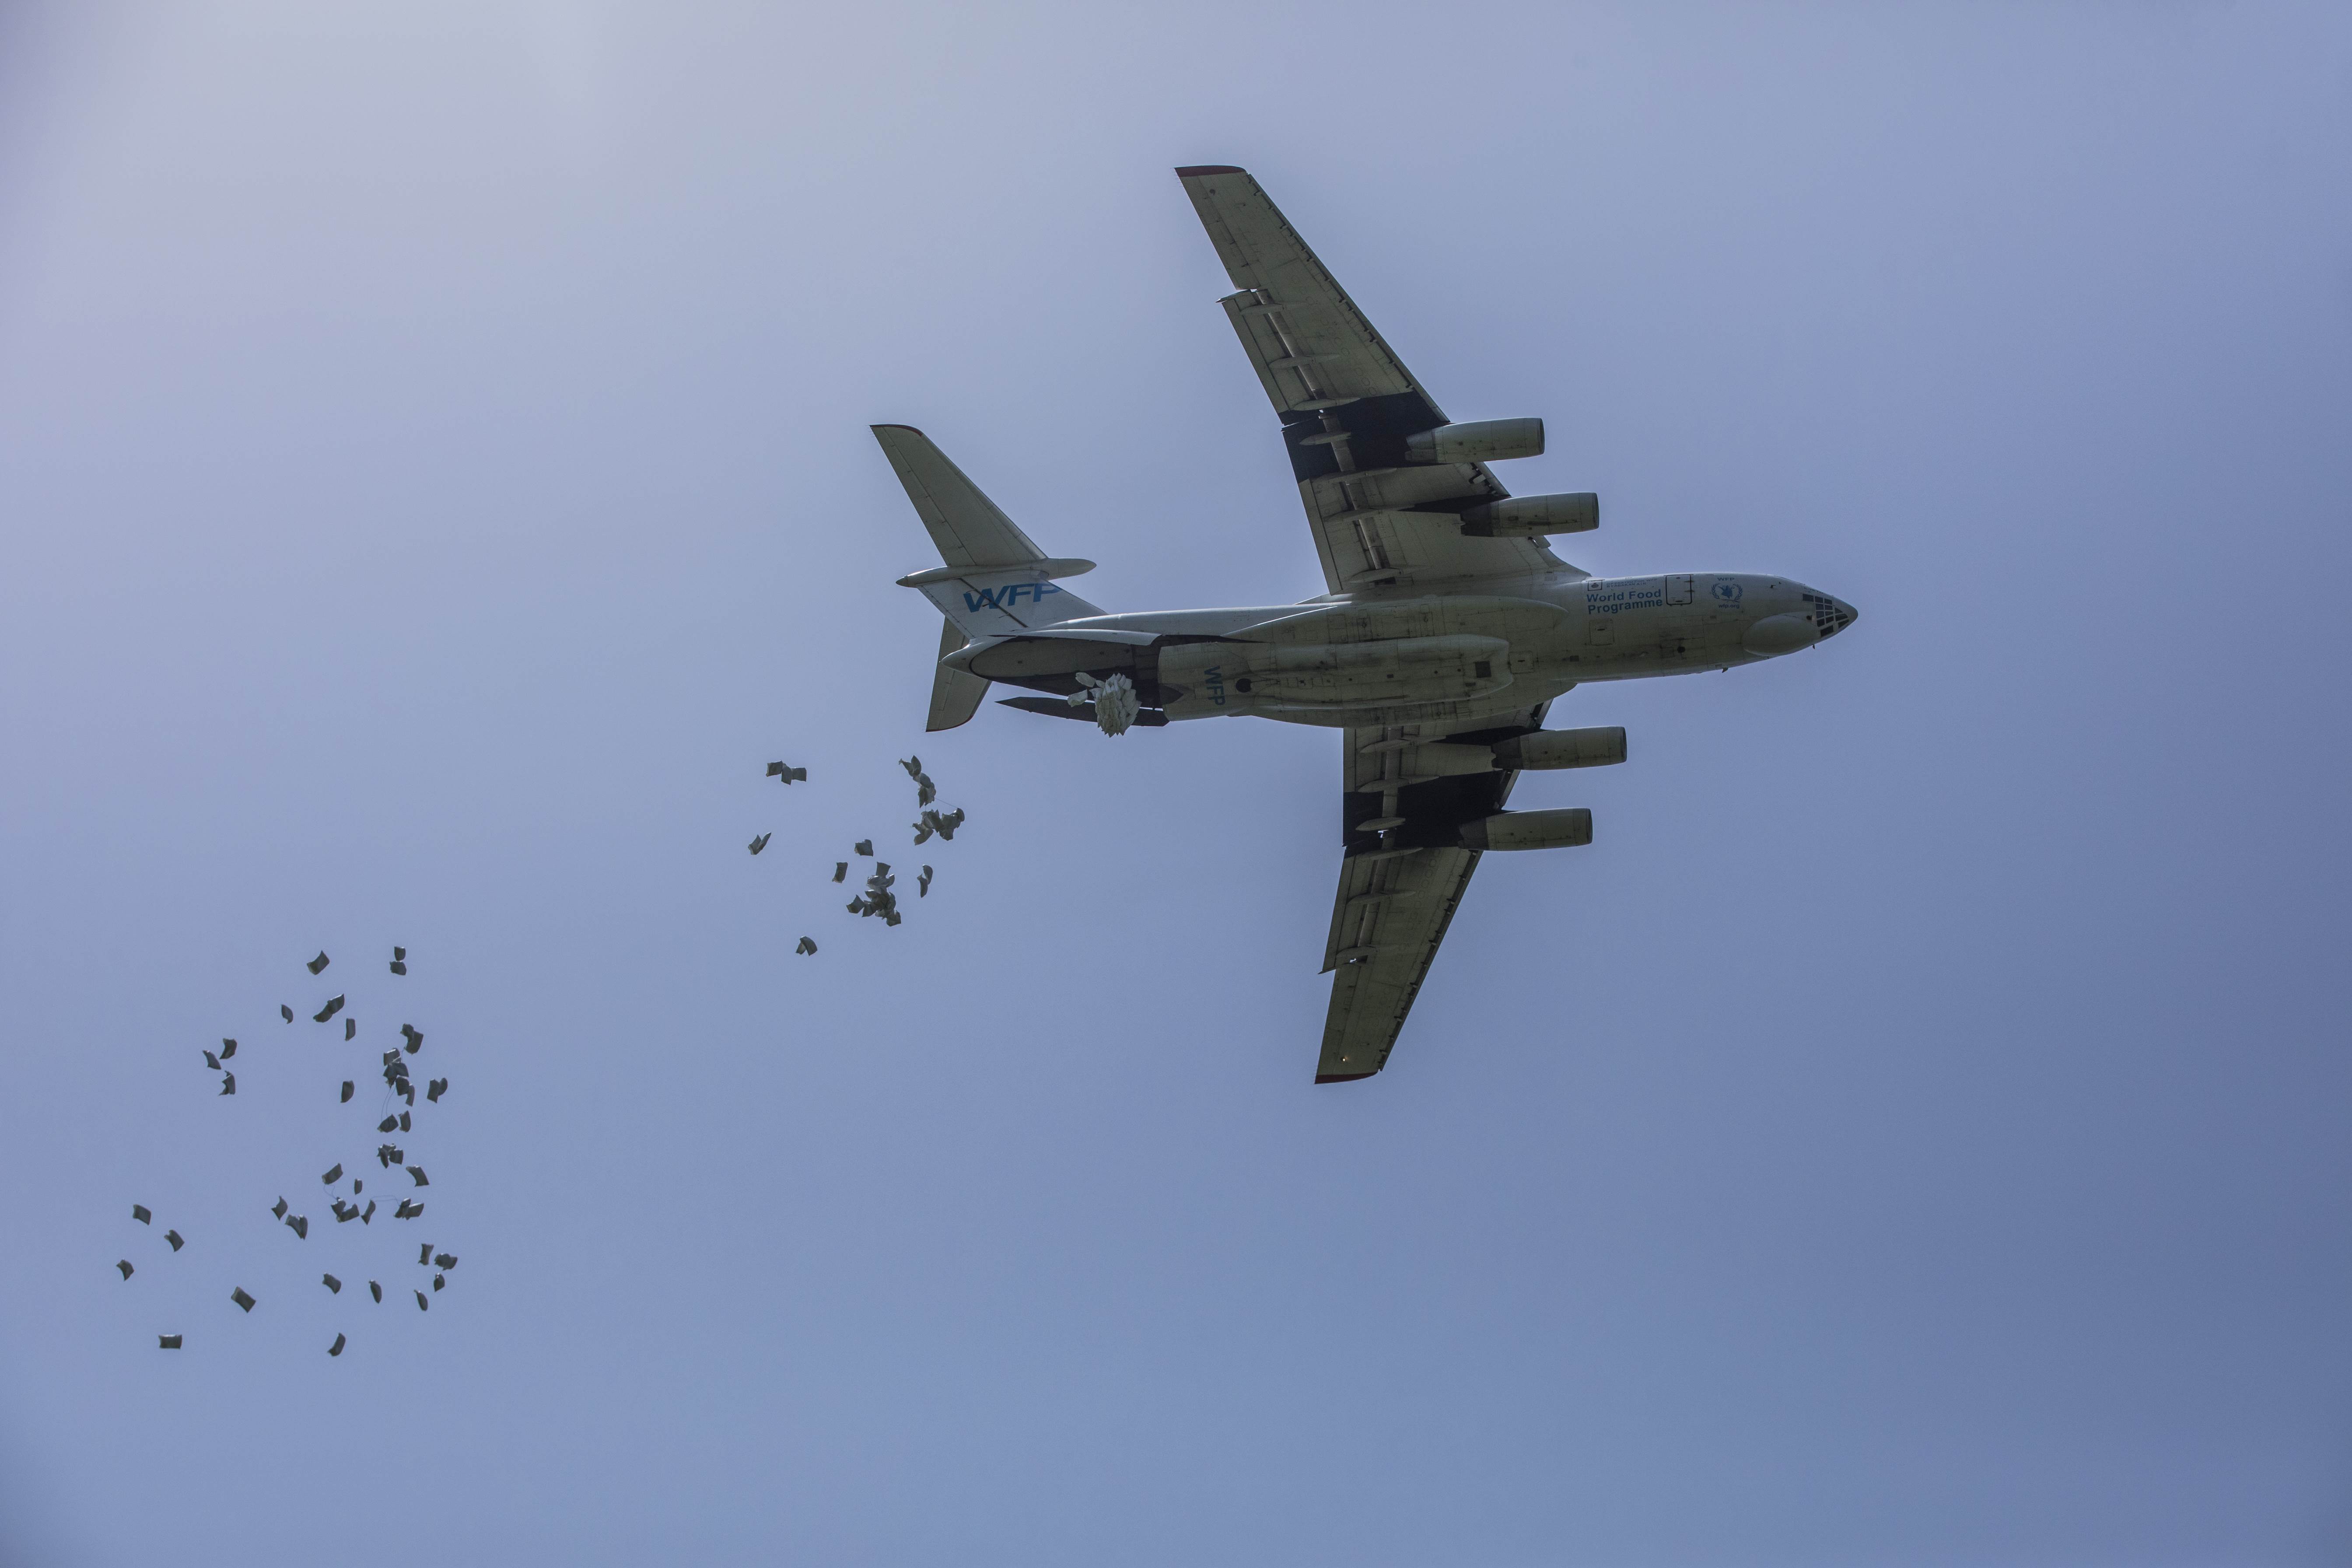 Air drop and food distribution in remotest areas of South Sudan